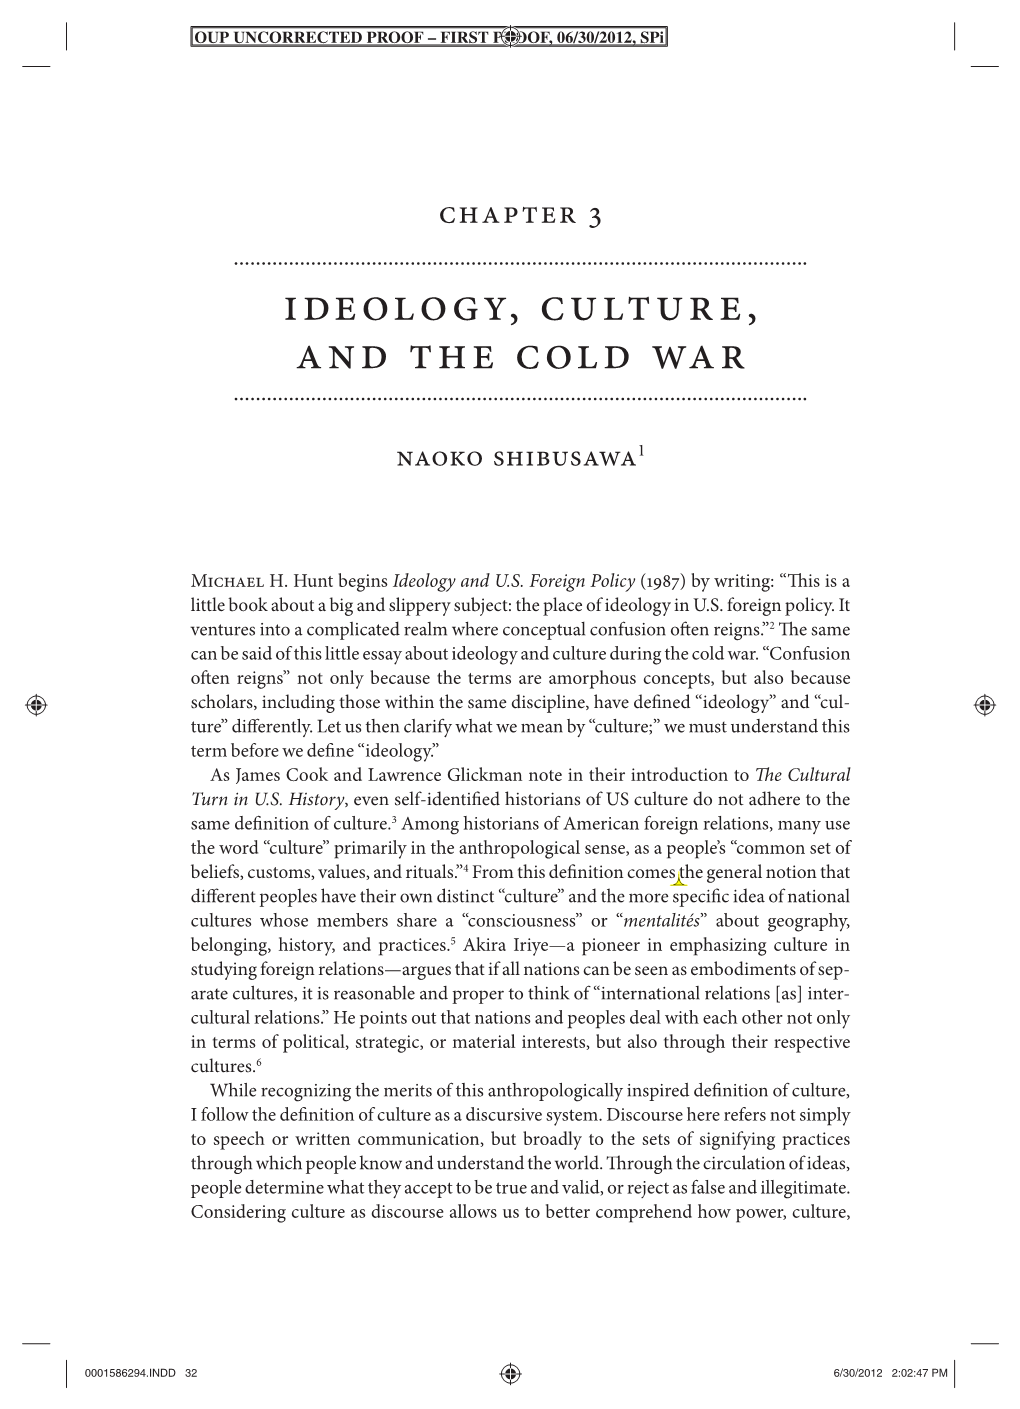 Ideology, Culture, and the Cold War